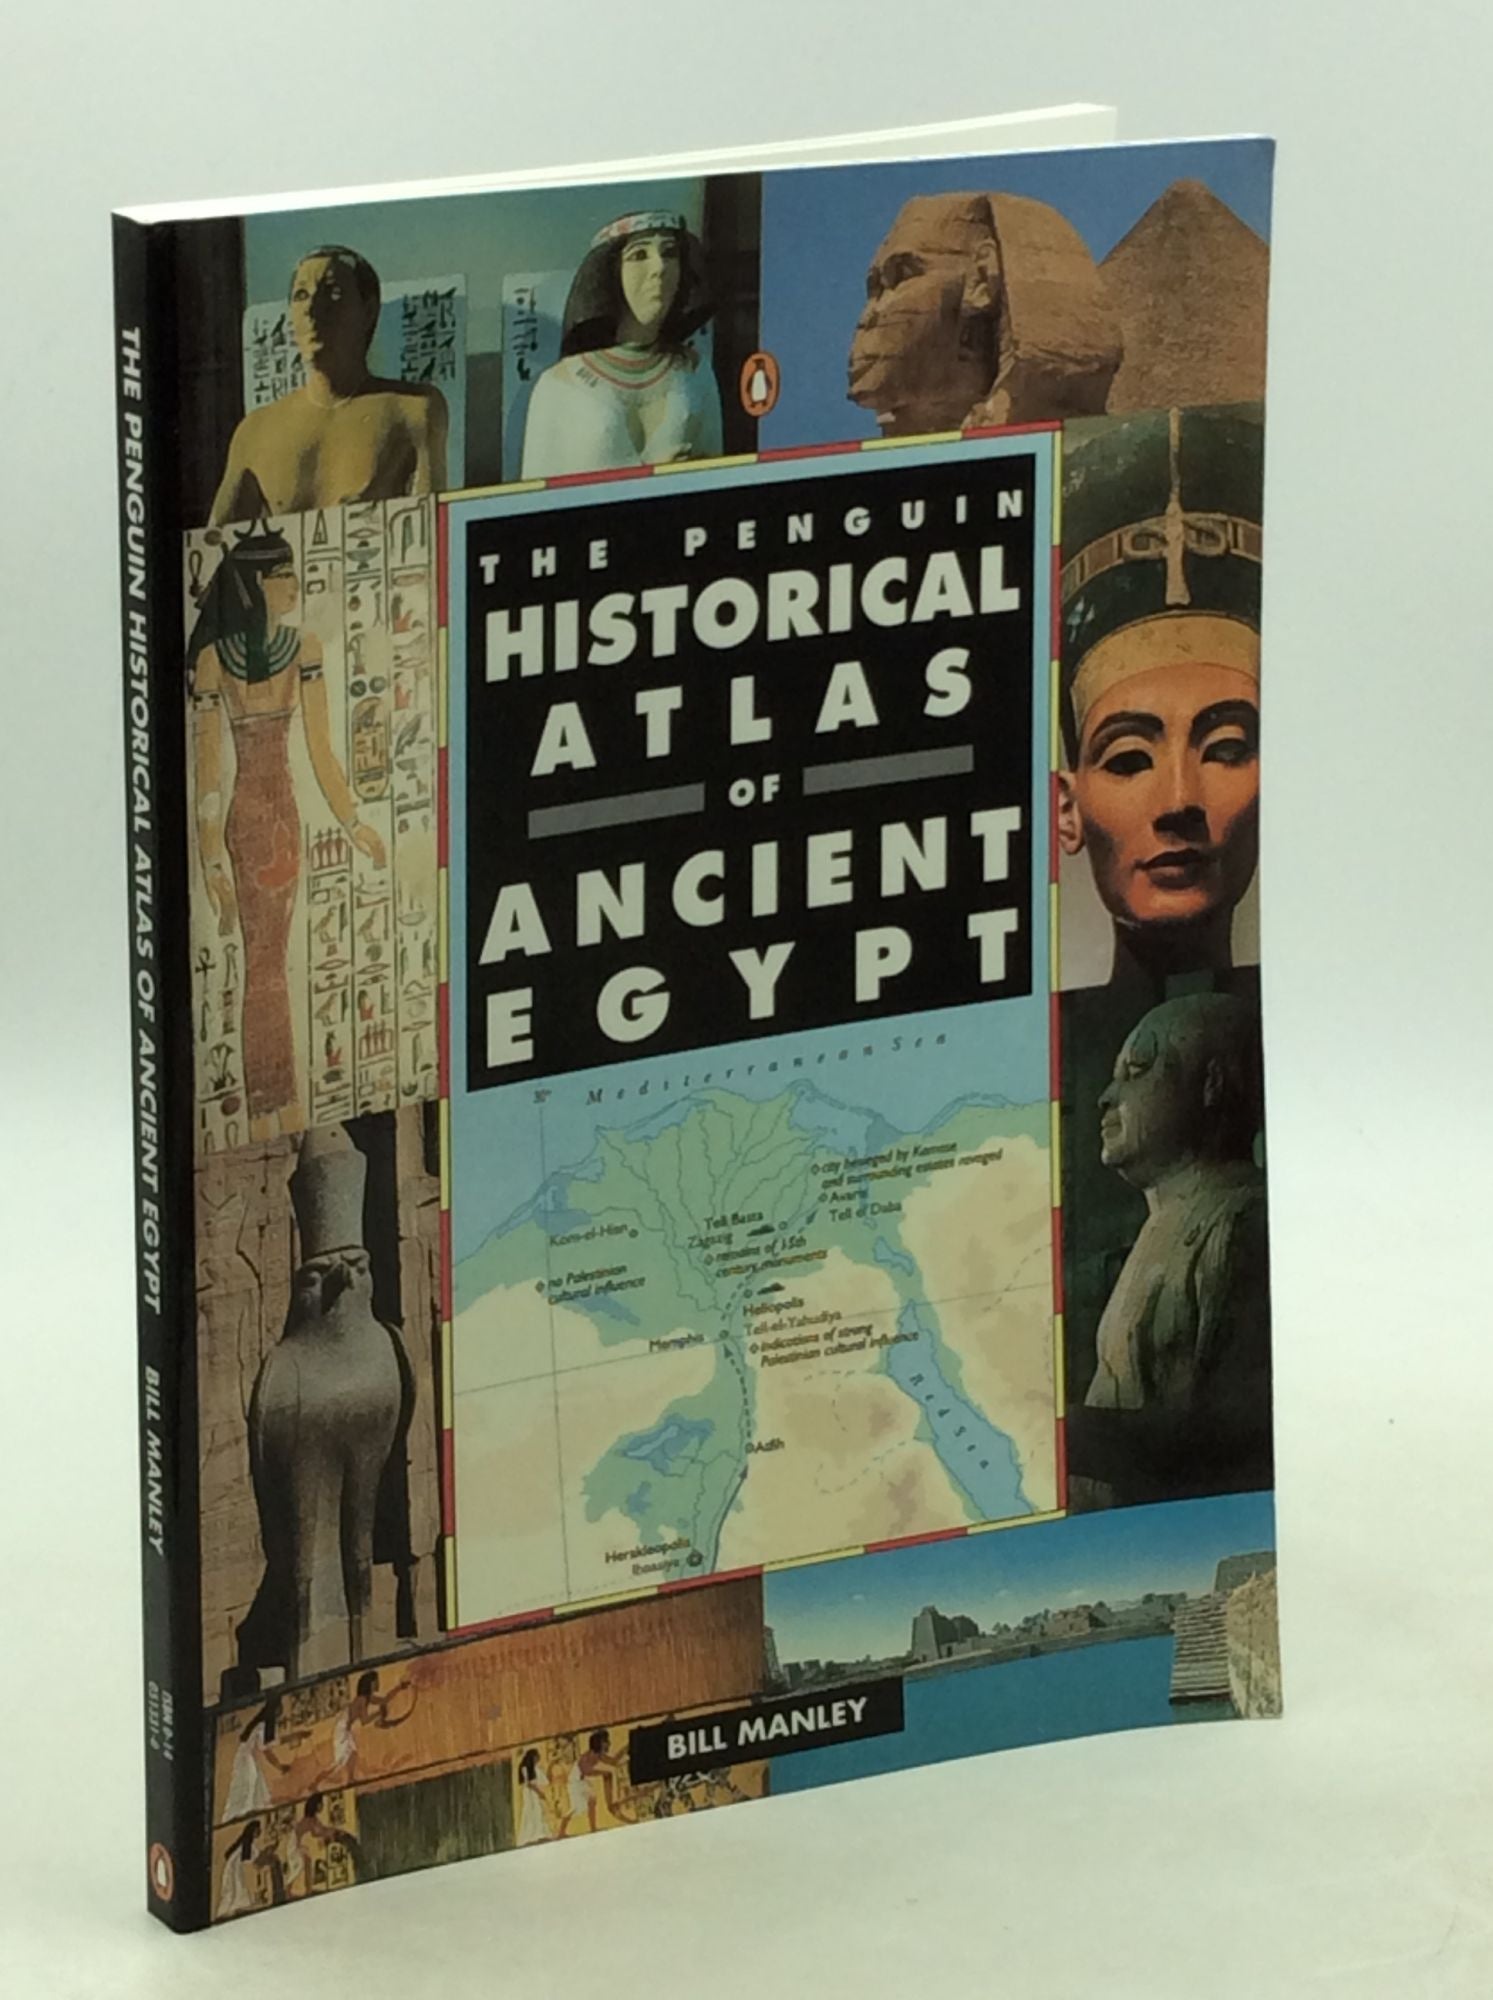 THE PENGUIN HISTORICAL ATLAS OF ANCIENT EGYPT | Bill Manley | 4th printing